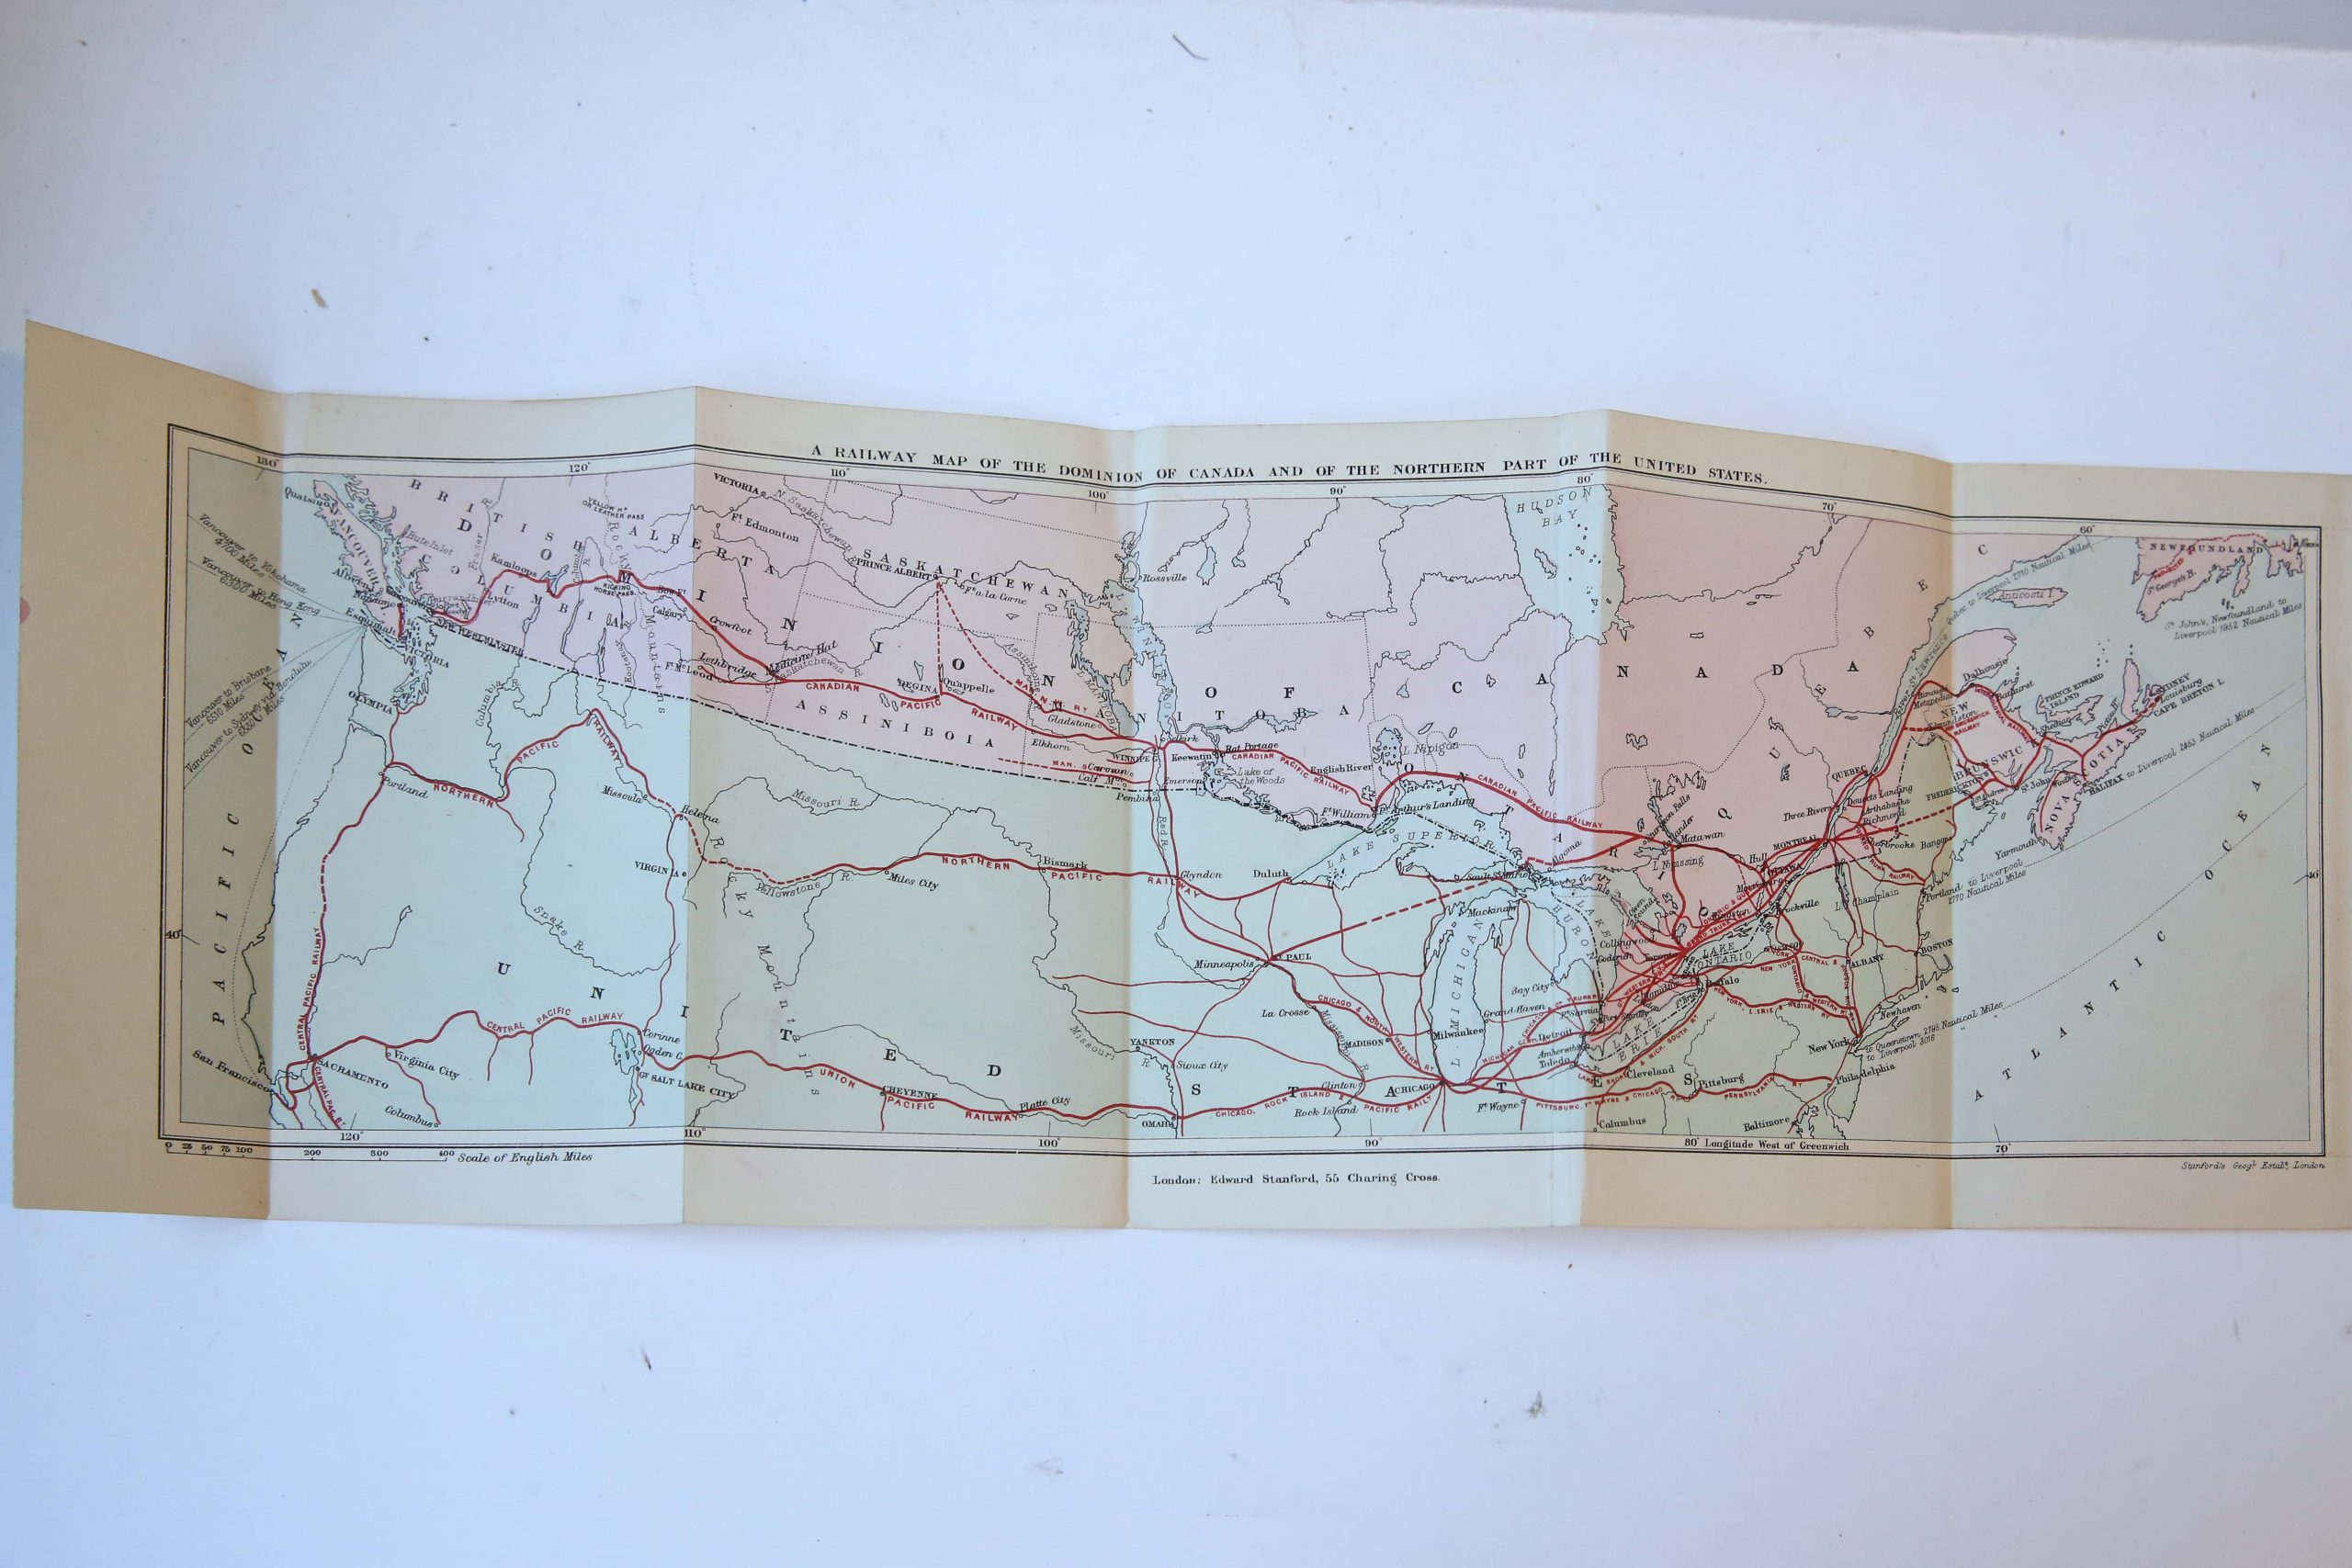 Cartography/map: Colored map "A railway map of the dominion of Canada and of the northern part of the United States, lithography 19 x 56 cm.